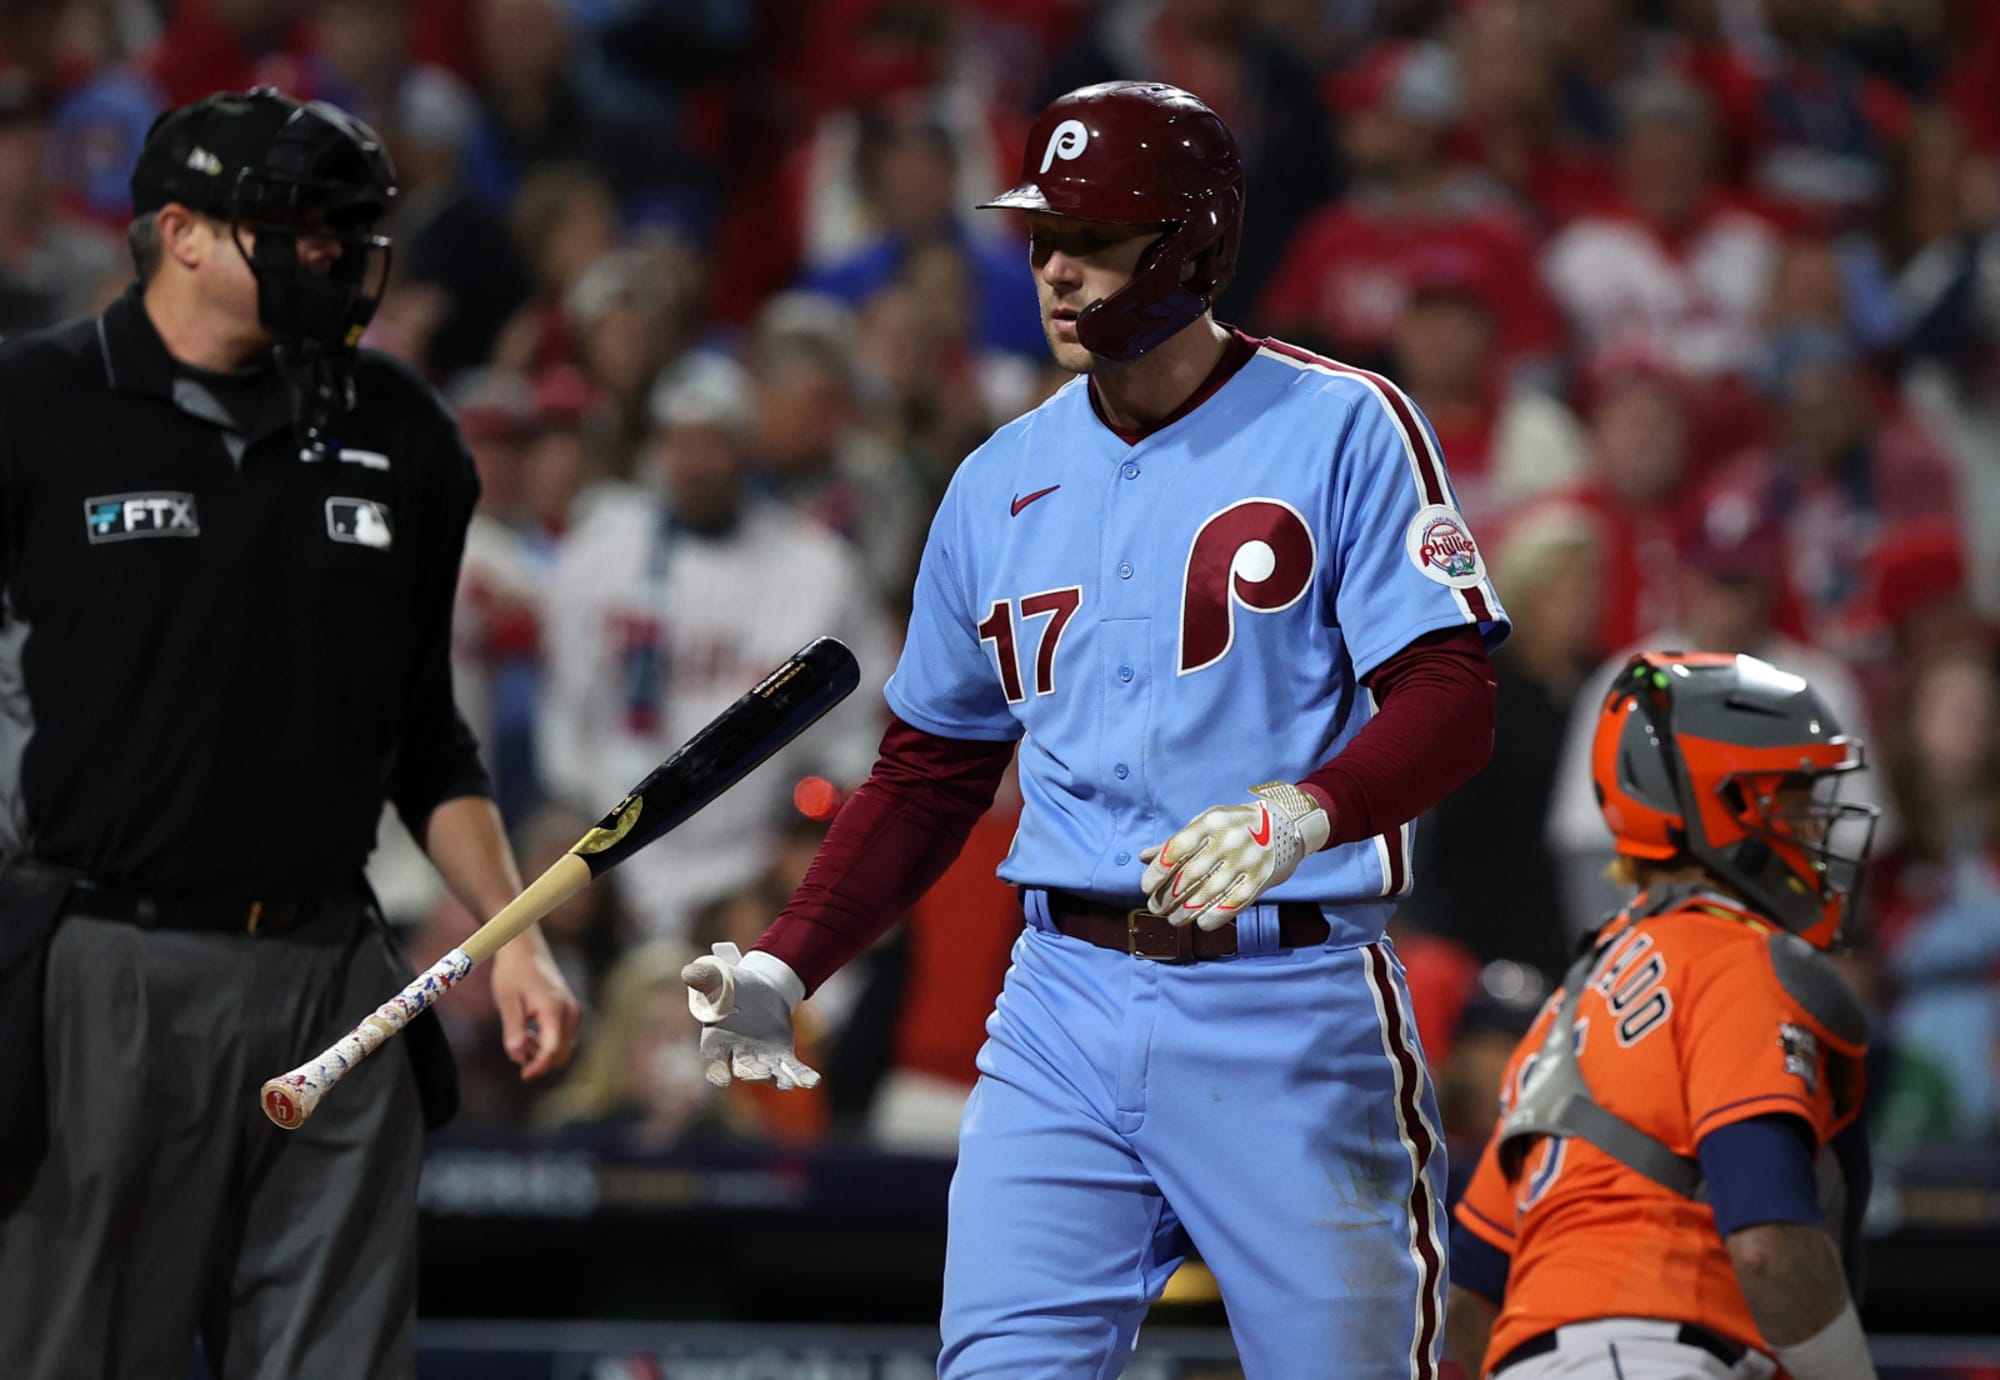 PHILS RHYS HOSKINS MAY BE BACK BY WORLD SERIES, THOMSON SAYS